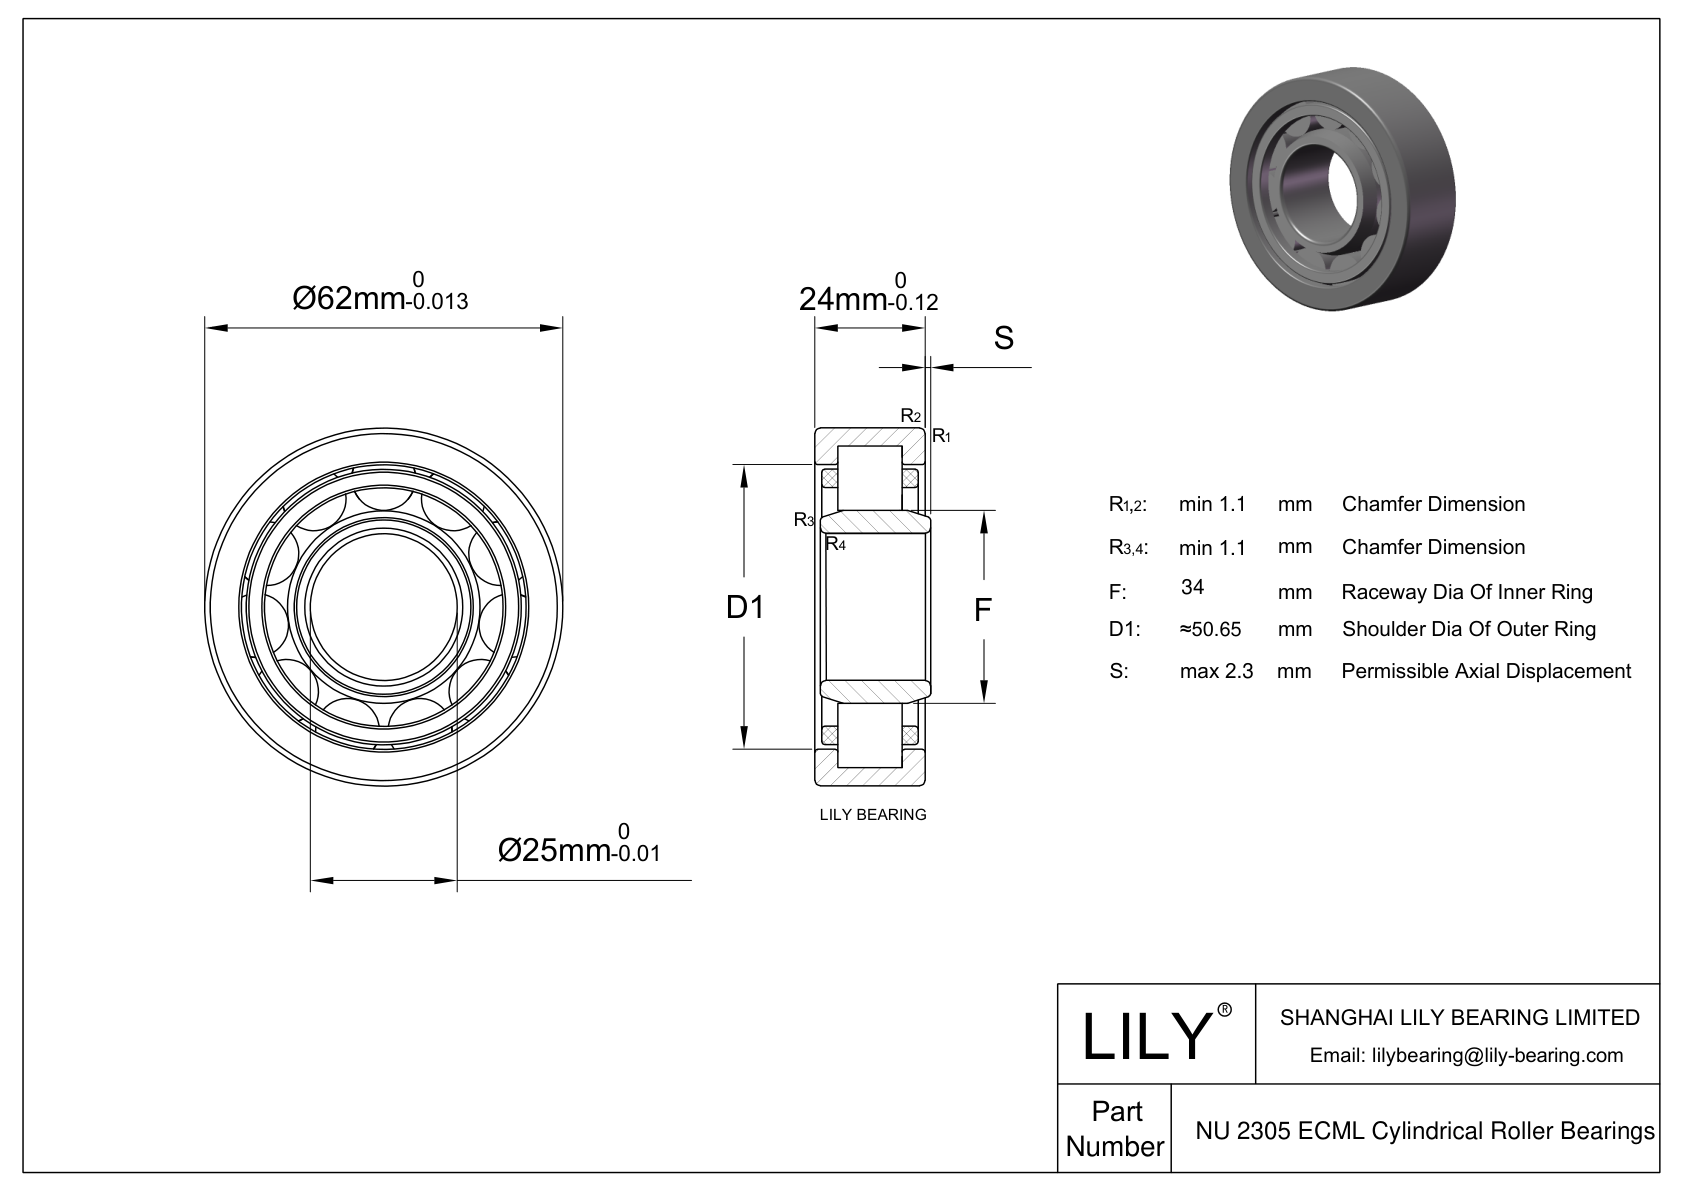 NU 2305 ECML Single Row Cylindrical Roller Bearings With Inner Ring cad drawing